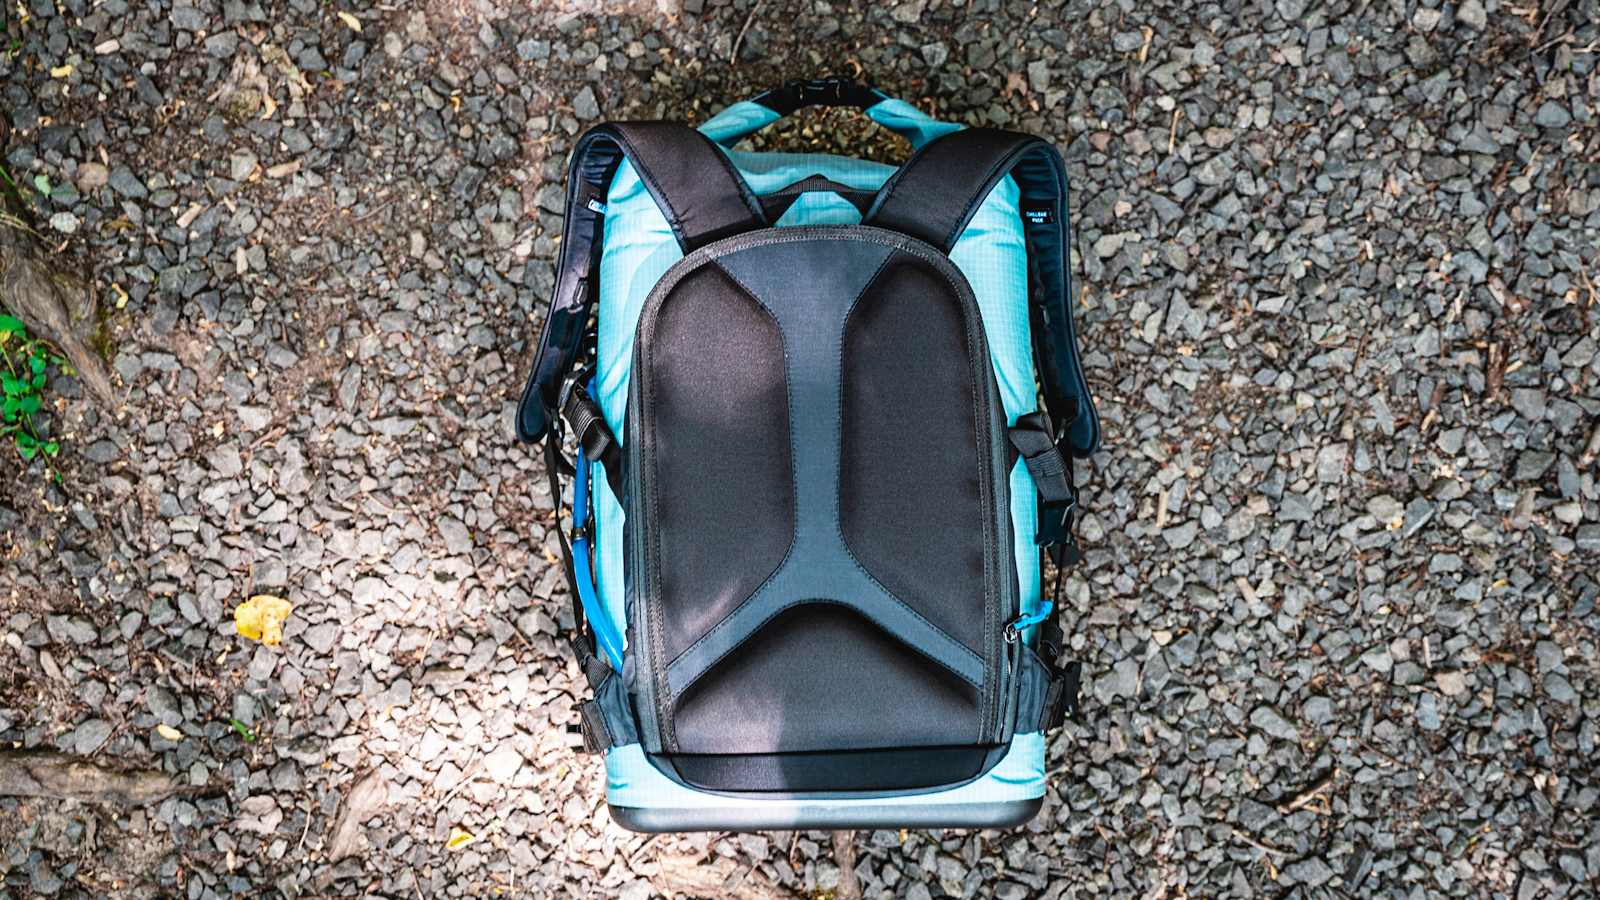 CamelBak Brings Cool Relief to Summer Adventures